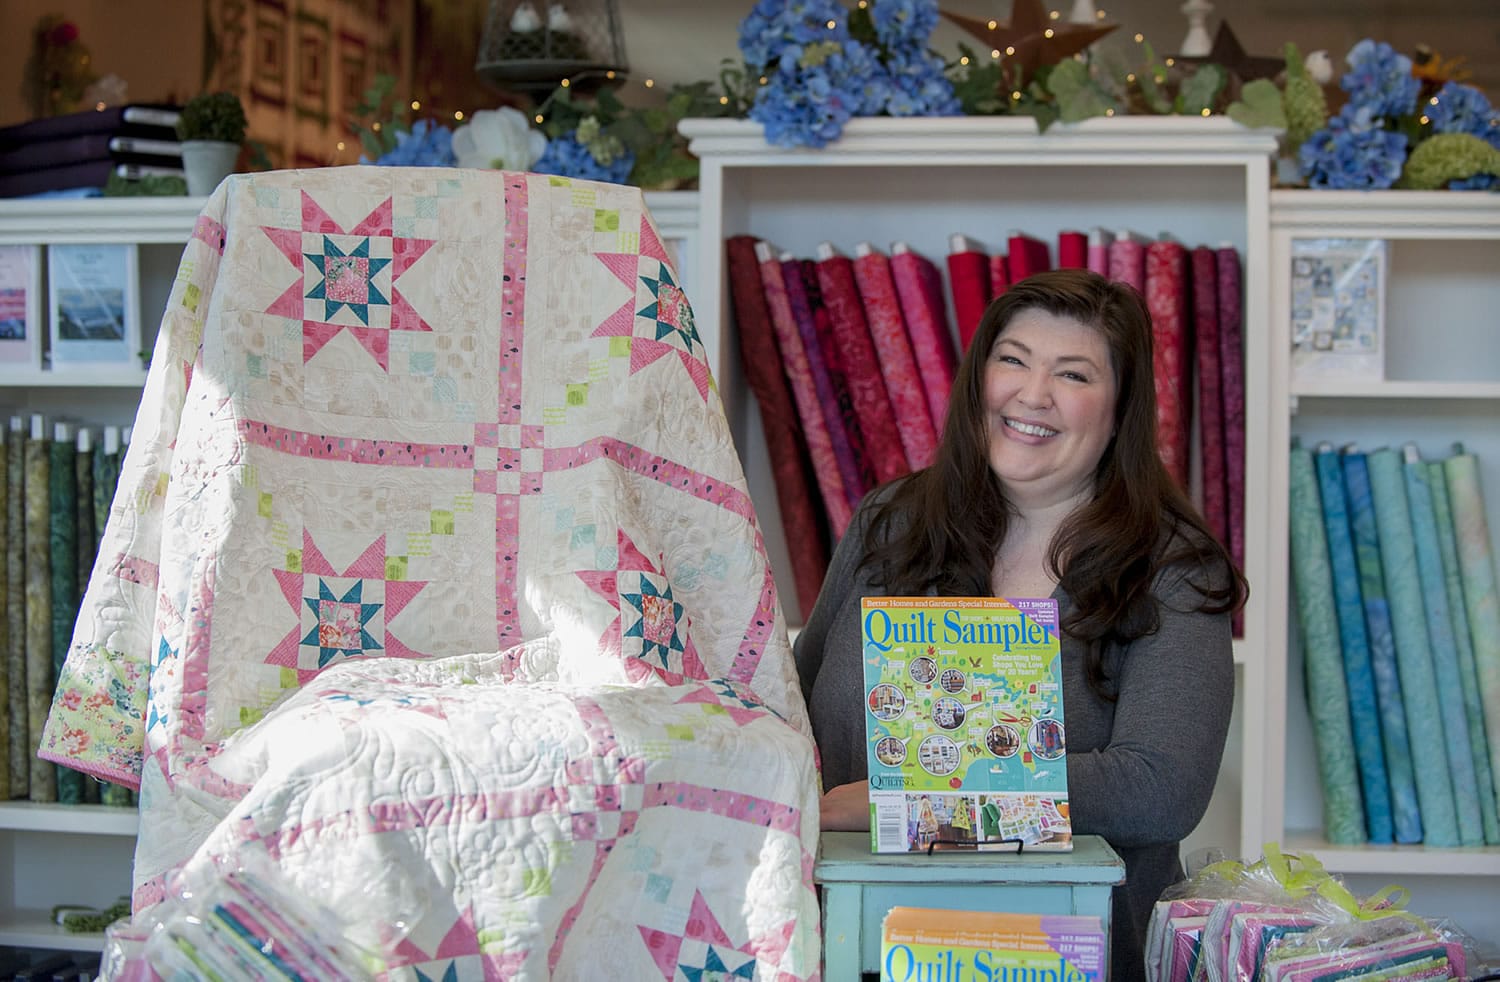 Cheran Bee, owner-operator of Fiddlesticks, shows a quilt that was featured in Better Homes and Gardens Quilt Sampler.